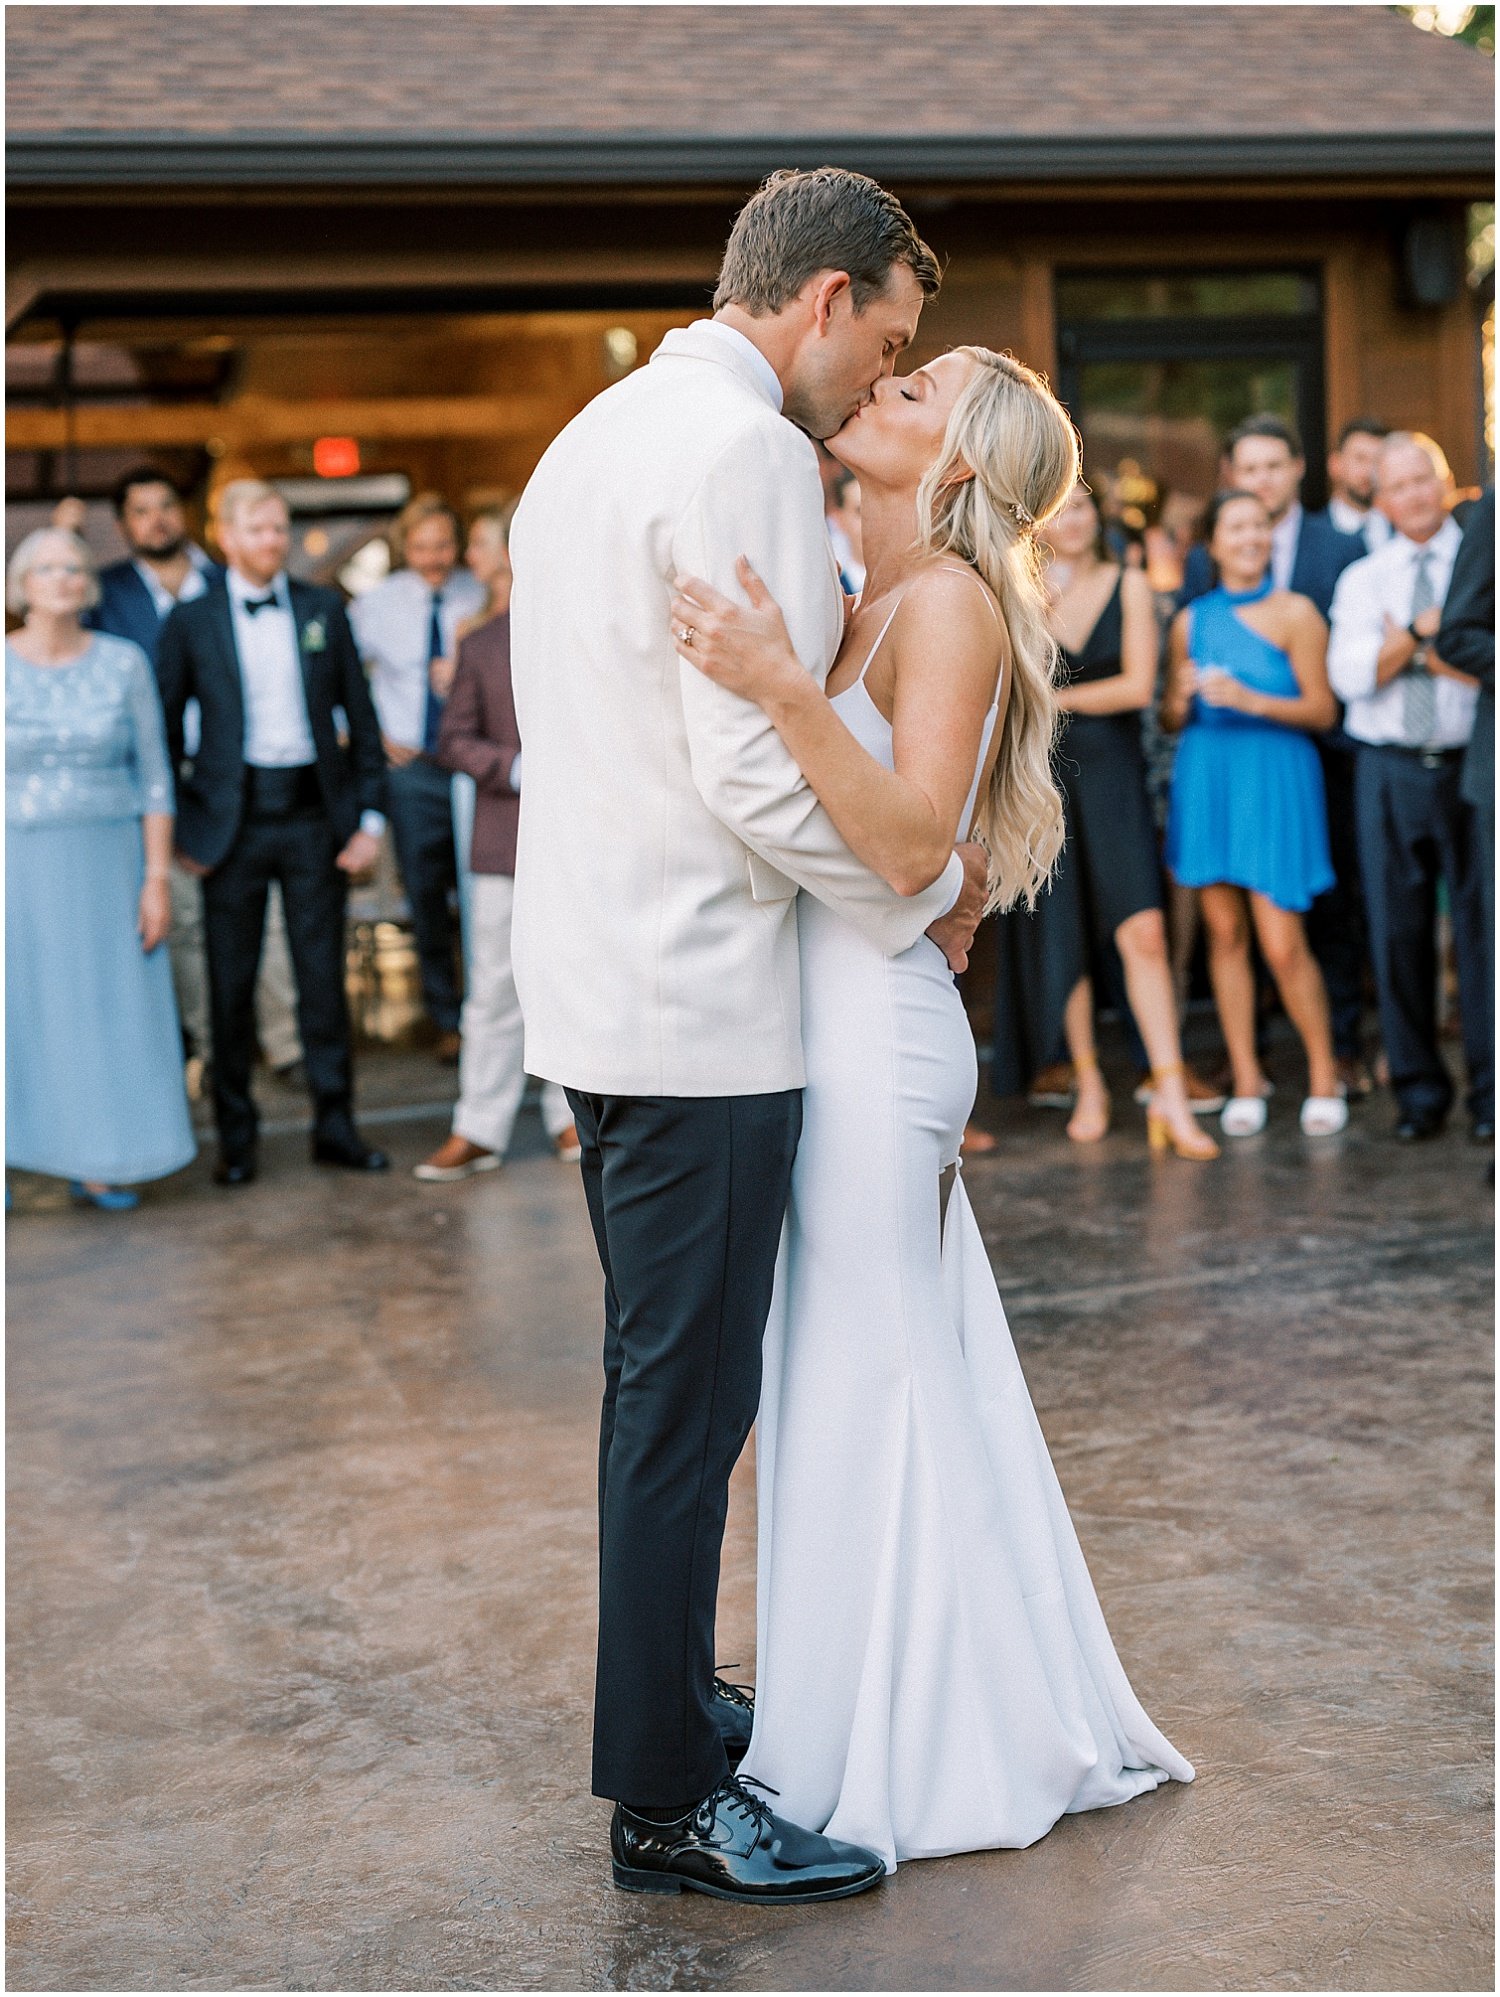 First Dance at the magnolia venue wedding